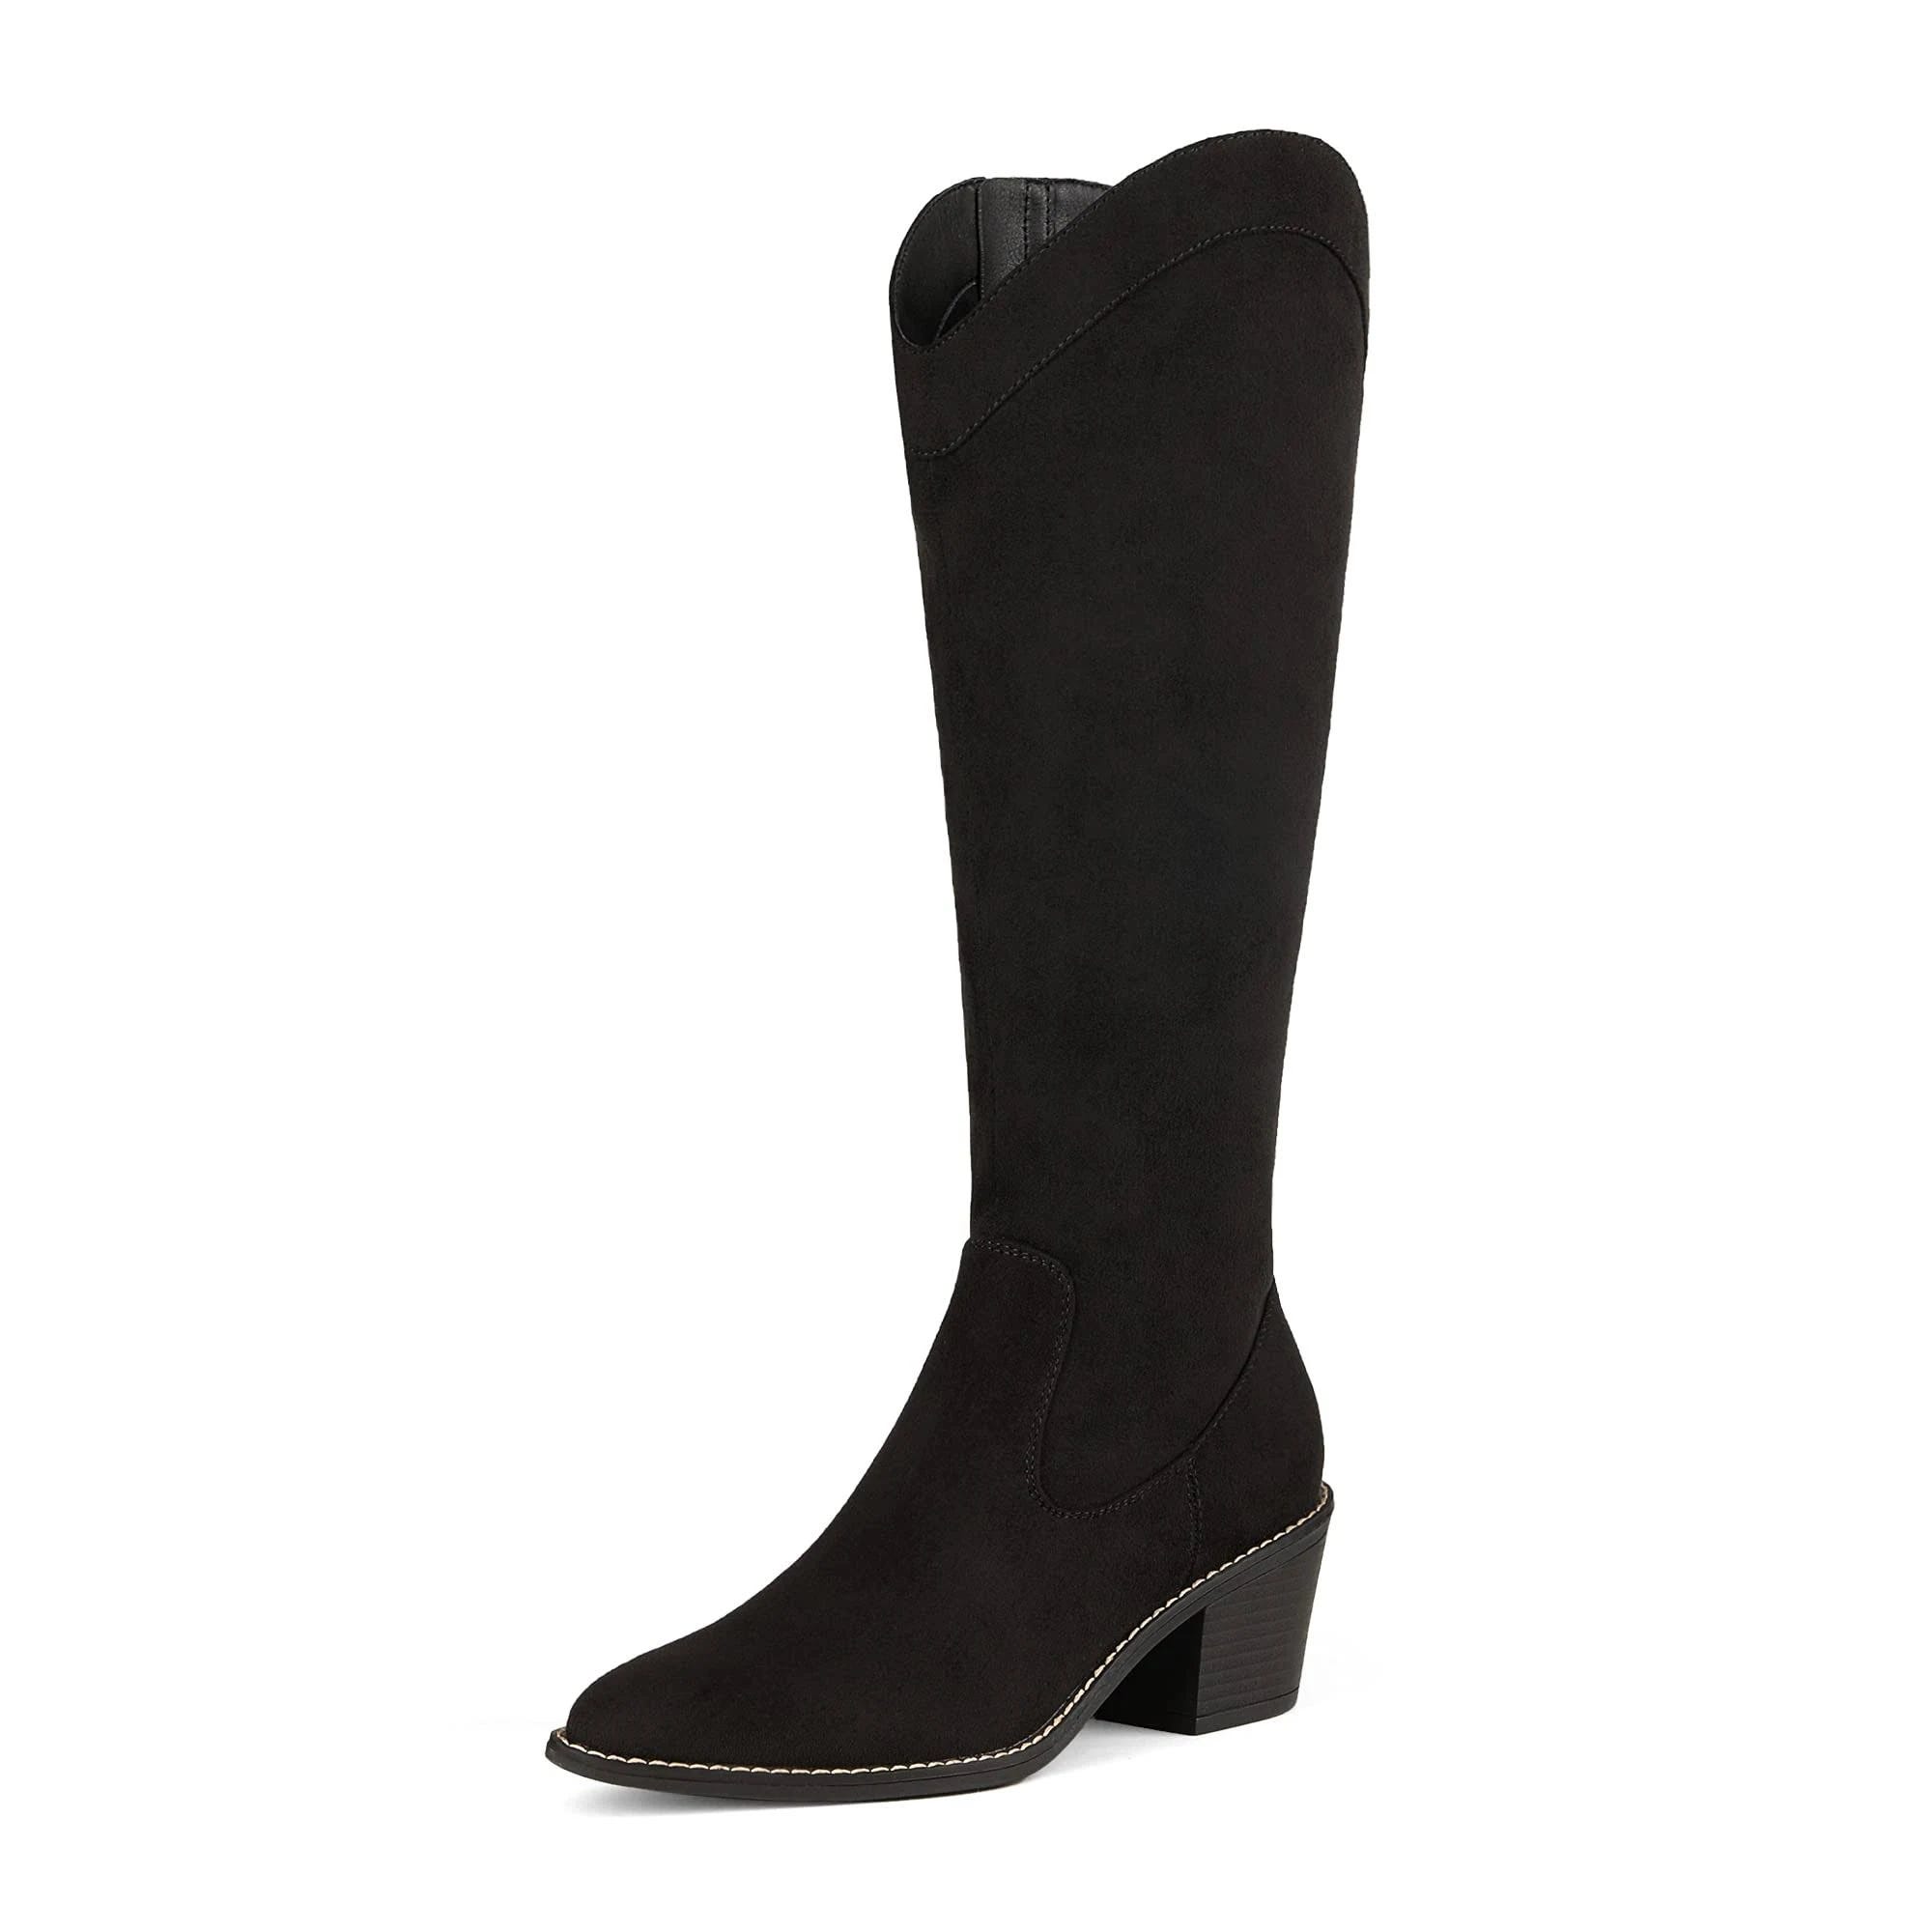 Black Knee High Western Boots with Side Zipper | Image